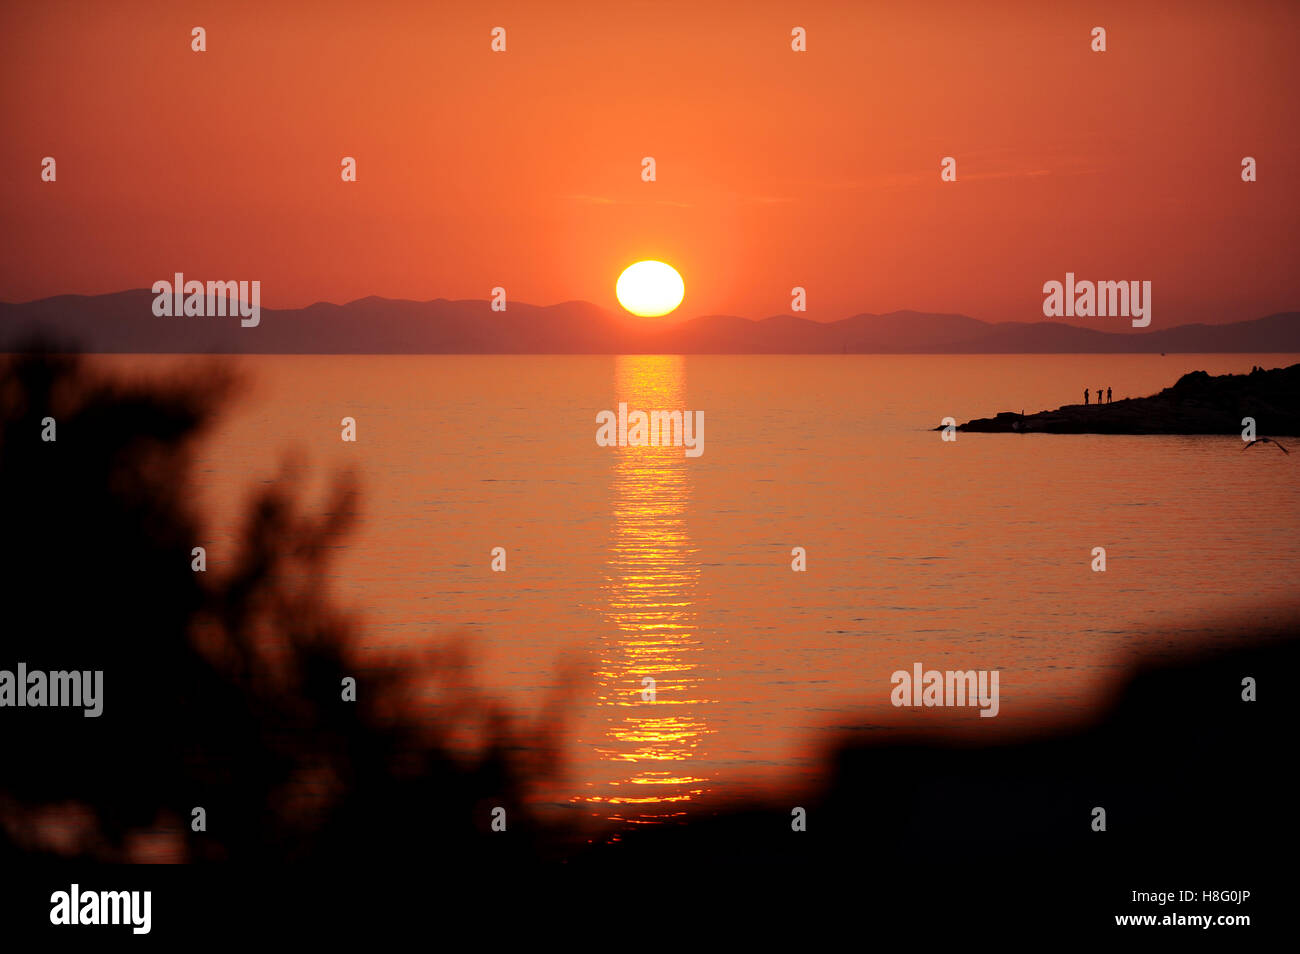 Adriatic sea islands at sunset with people on the shoreline Stock Photo